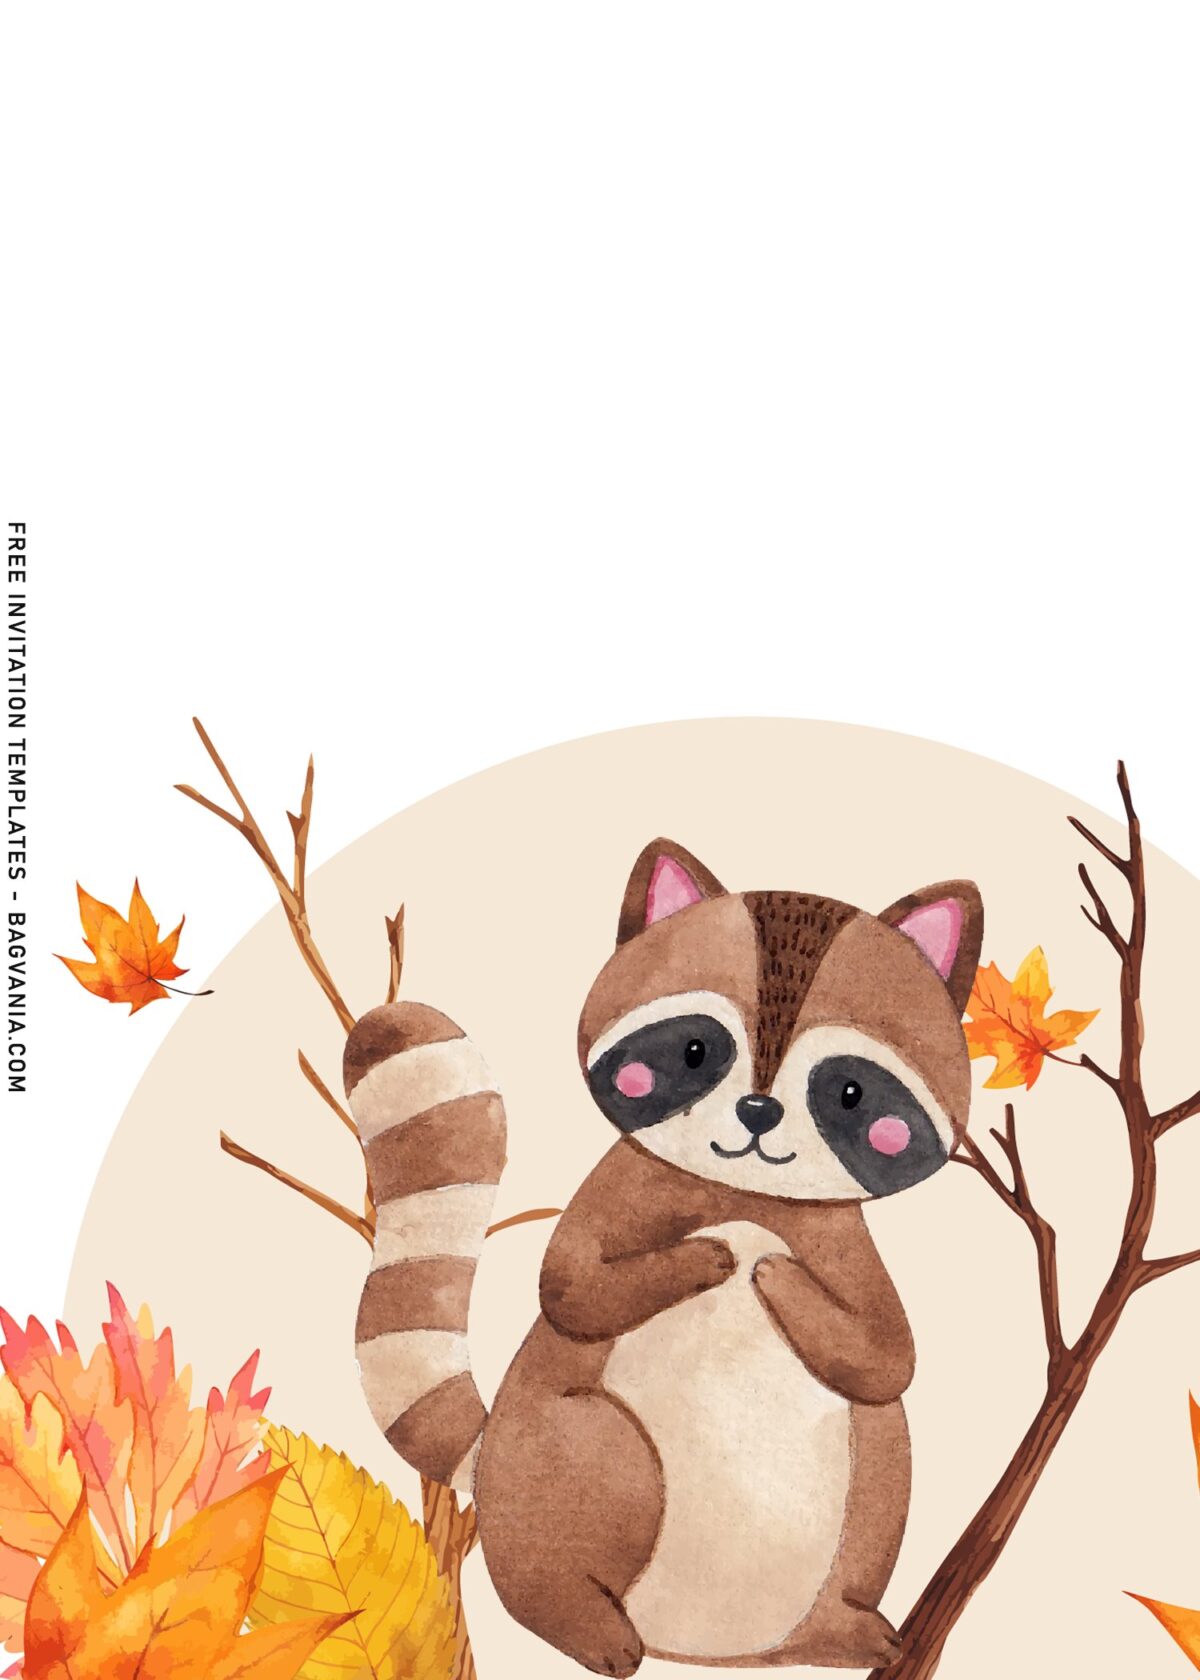 7+ Watercolor Forest Birthday Invitation Templates With Woodland Animal with adorable raccoon